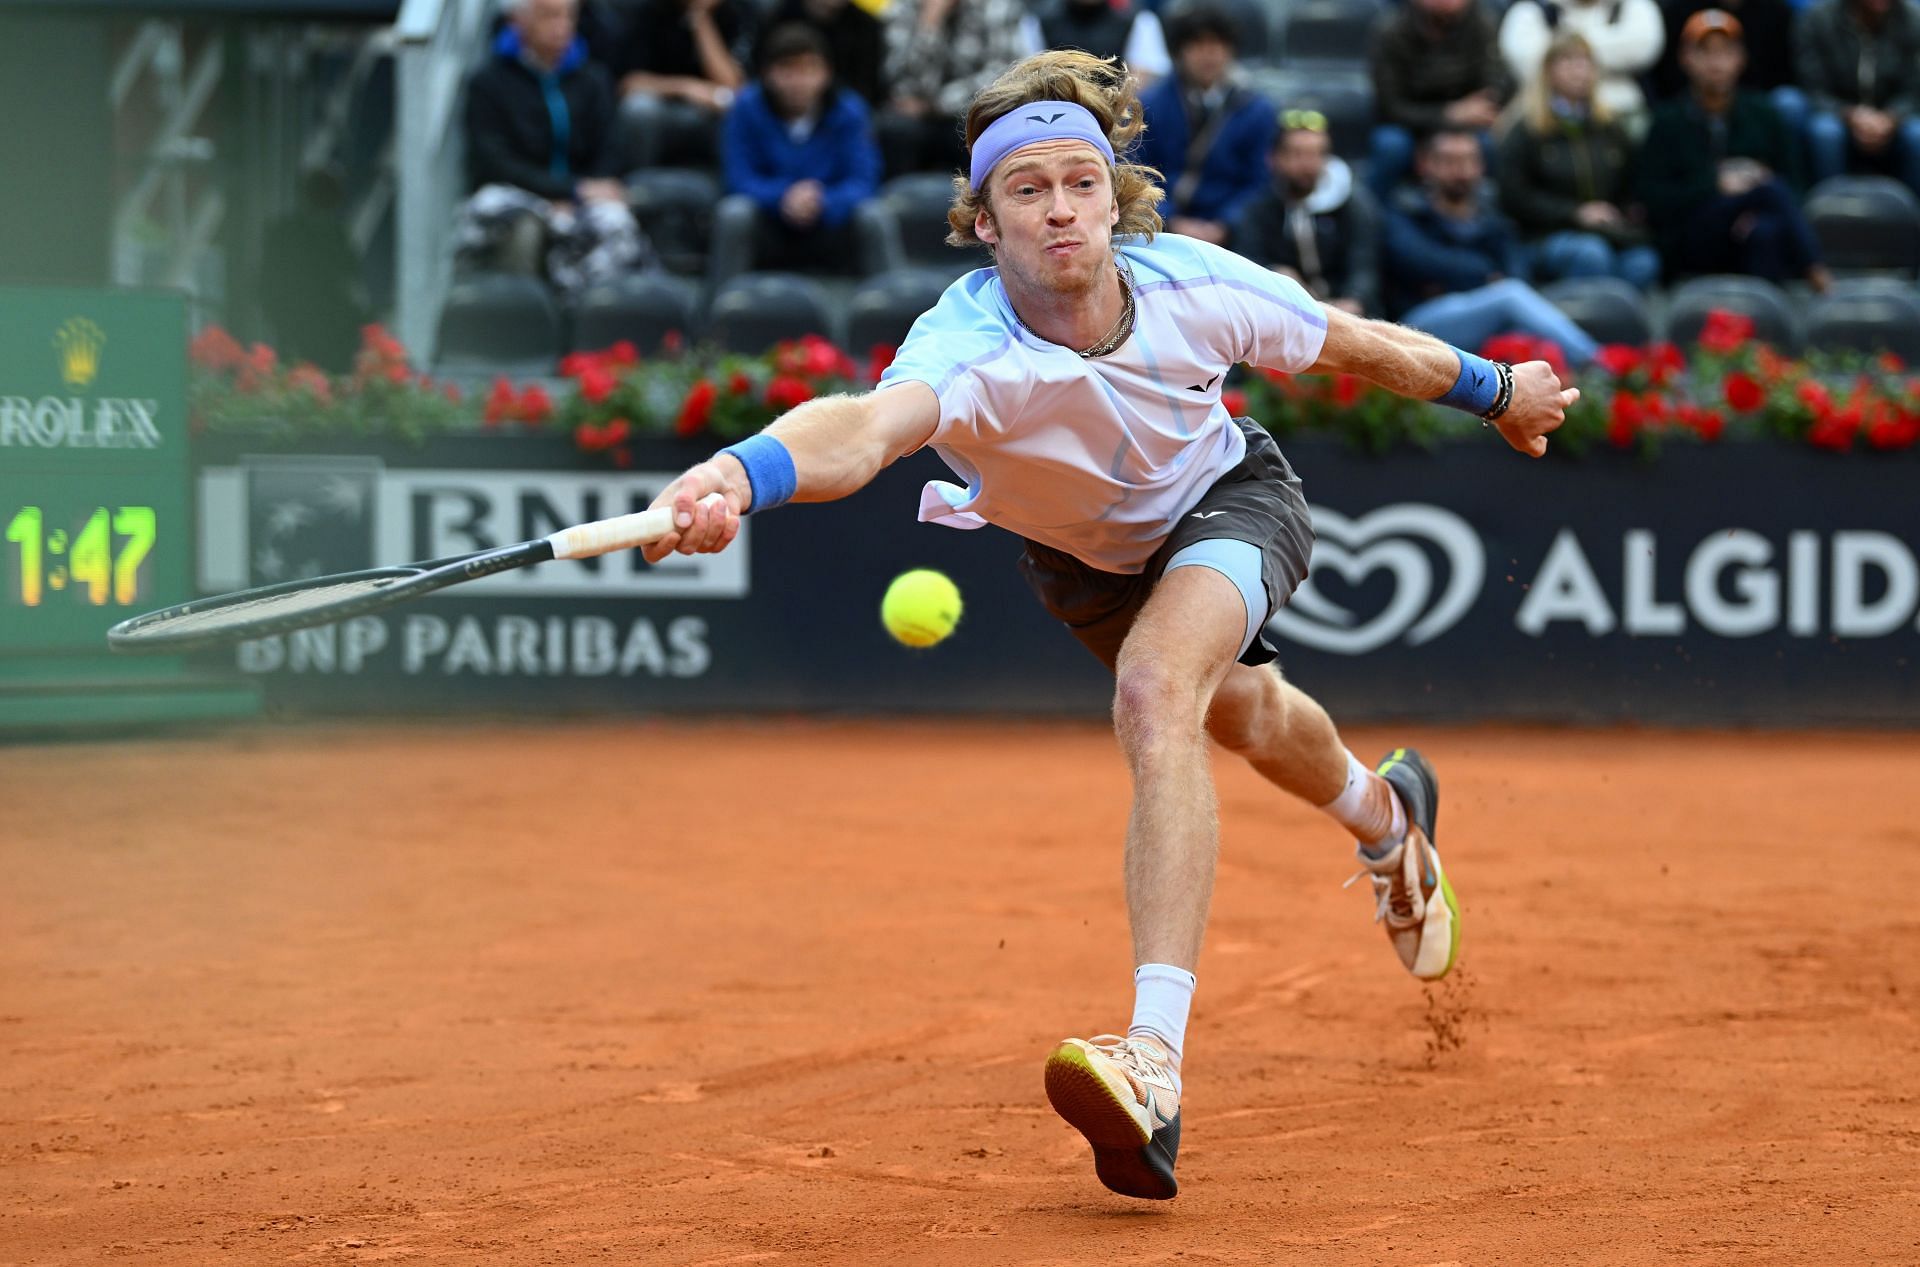 Andrey Rublev in action at the Italian Open